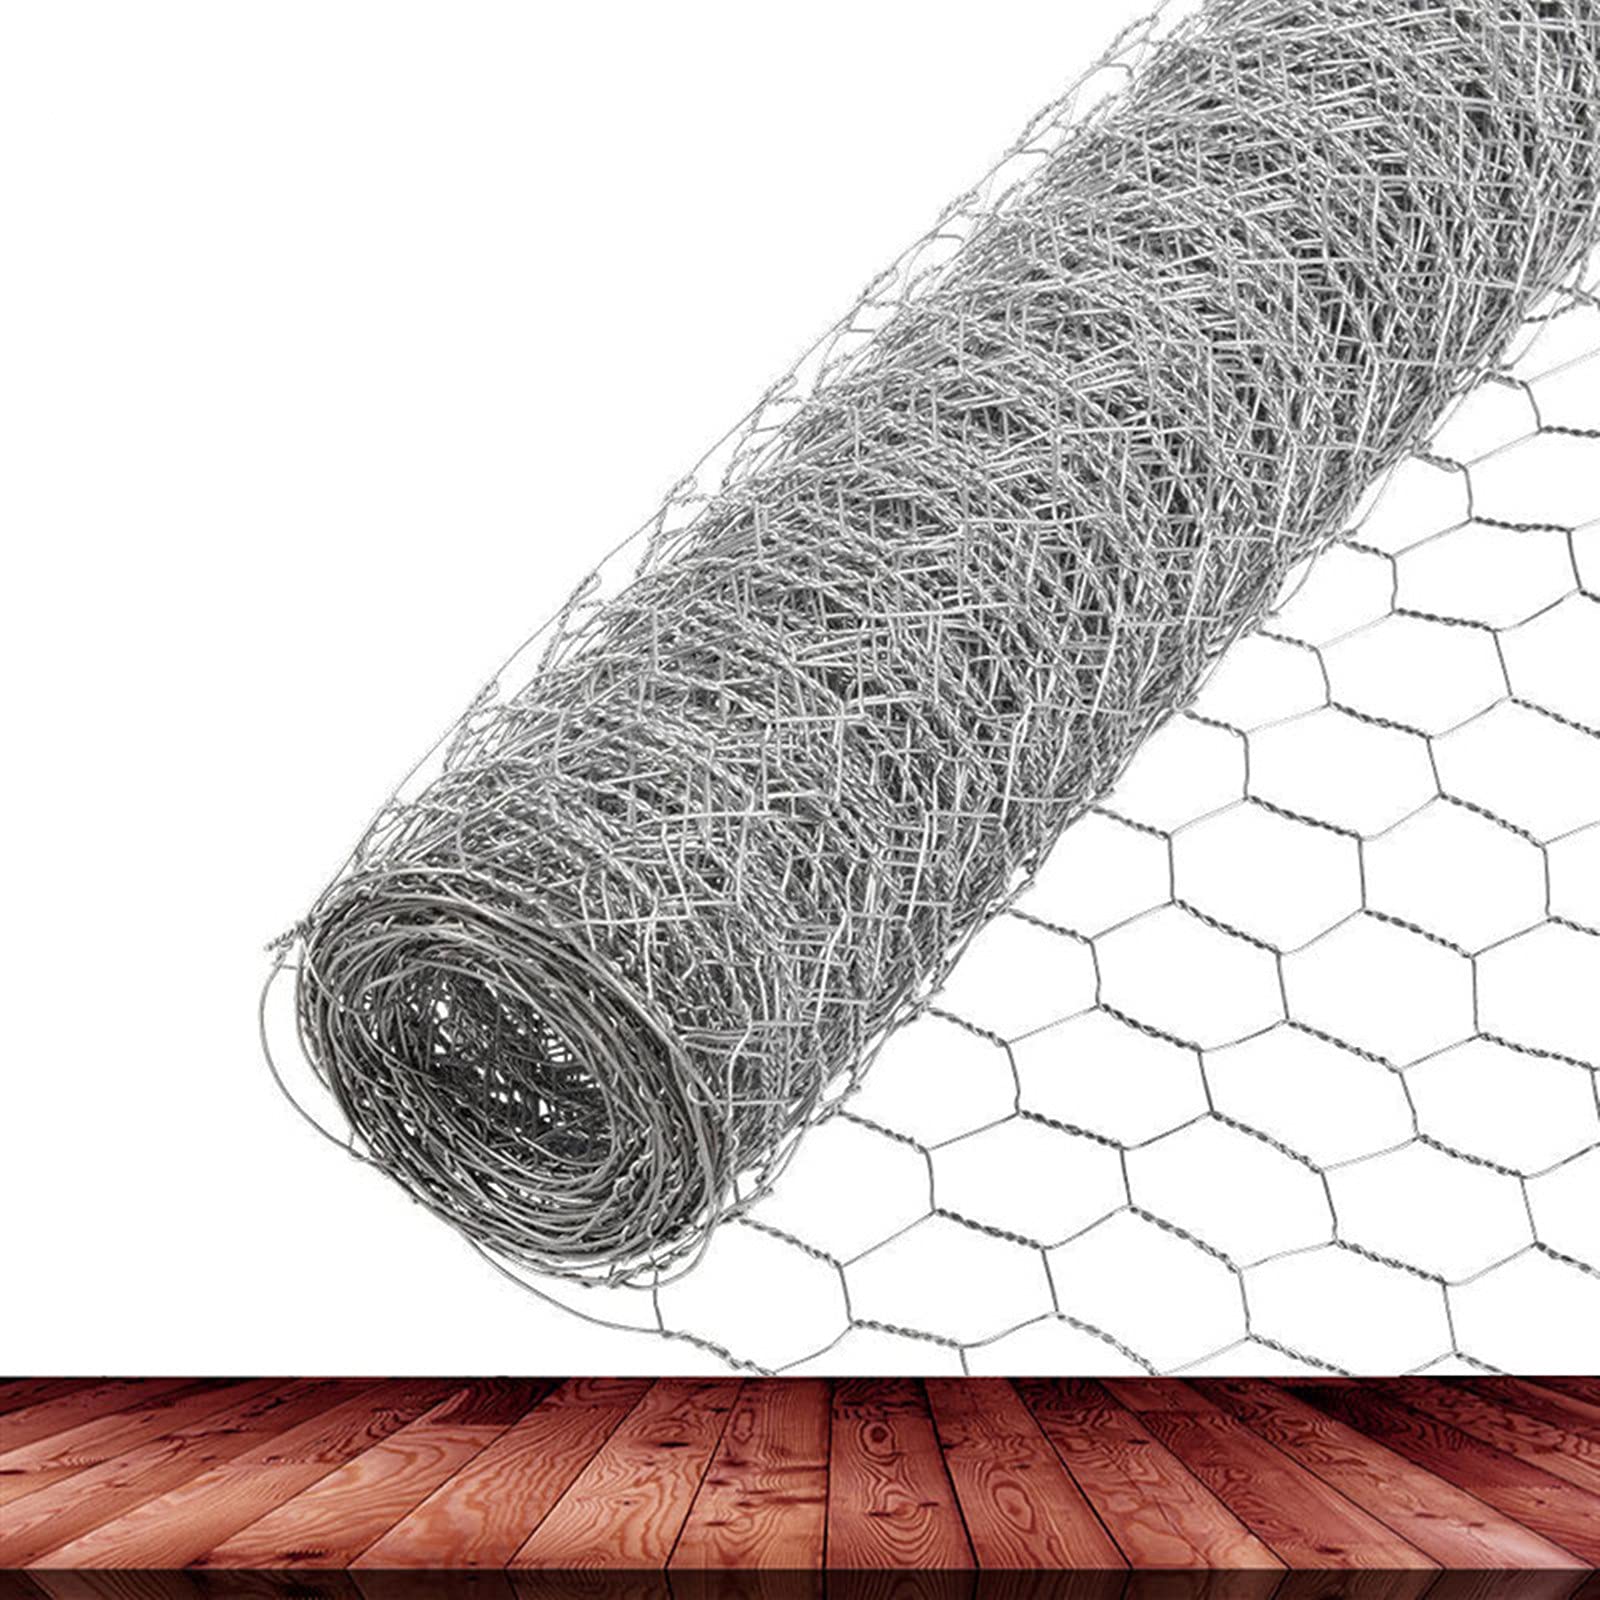 DoubleWood Chicken Wire Net for Craft Projects 3 Sheets Galvanized  Hexagonal Wire Mesh Fence 13.7 Inches x 40 Inches Mesh10 Feet (13.7 x 40  Inches - 3 Sheets)